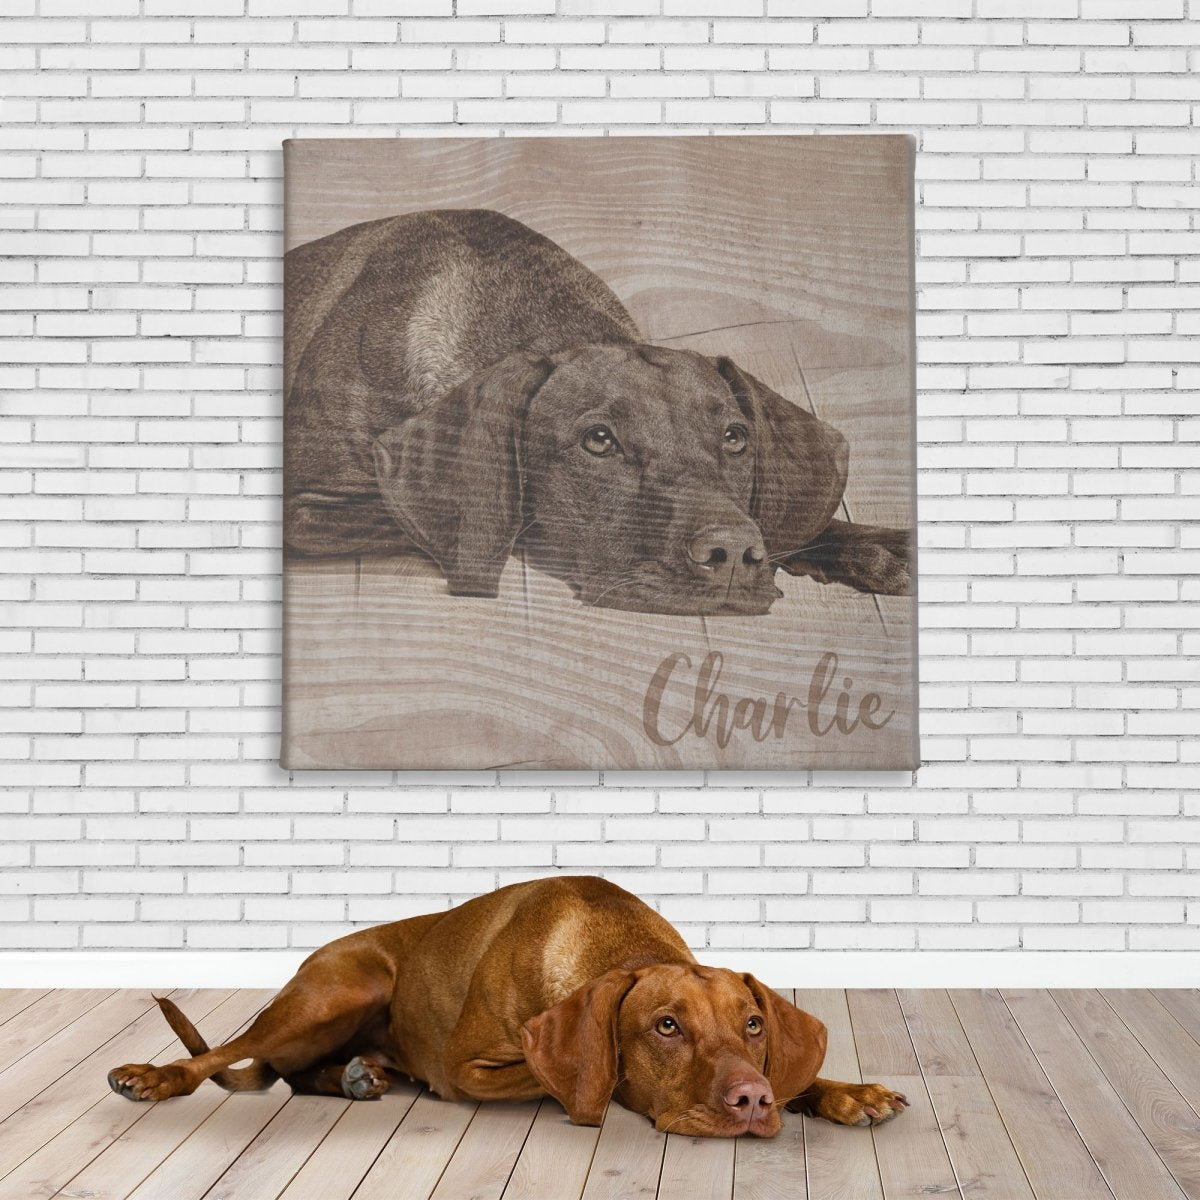 Wood style custom pet portrait to use as pet memorial gift